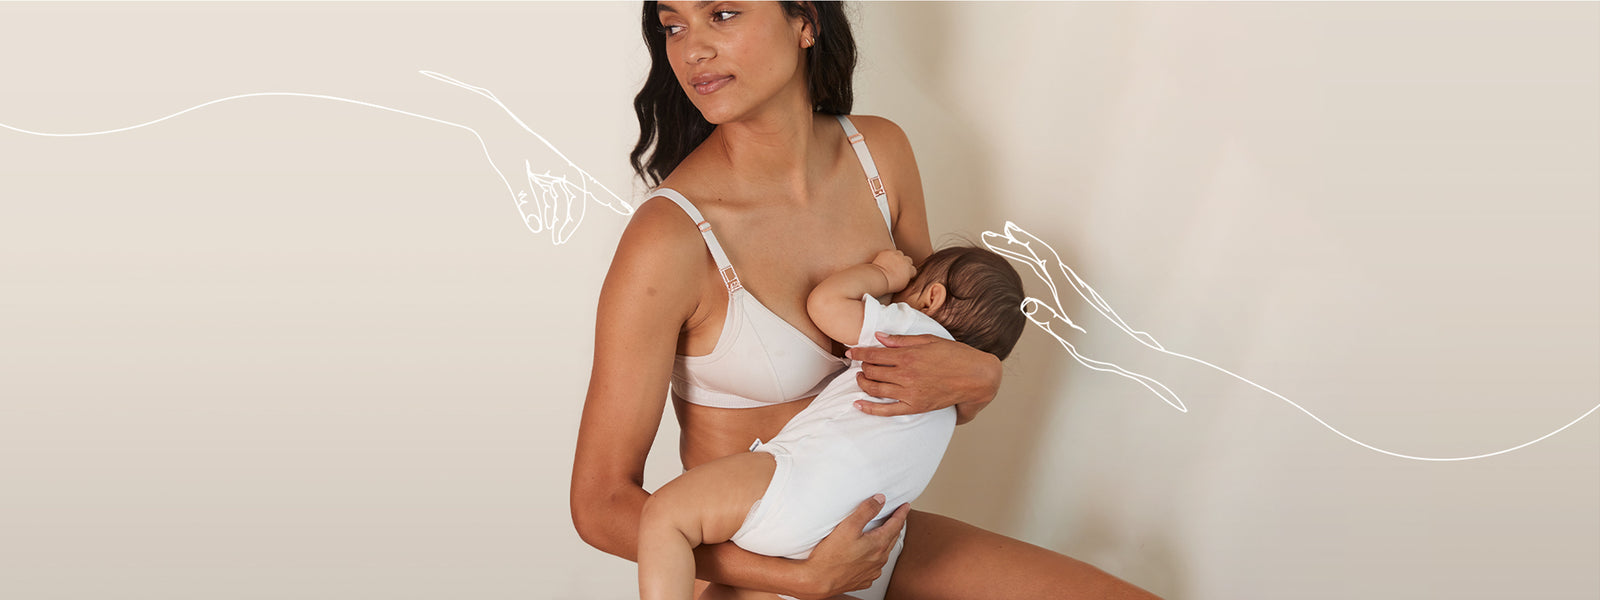 Stepping into motherhood? Our nursing bra is soft against your